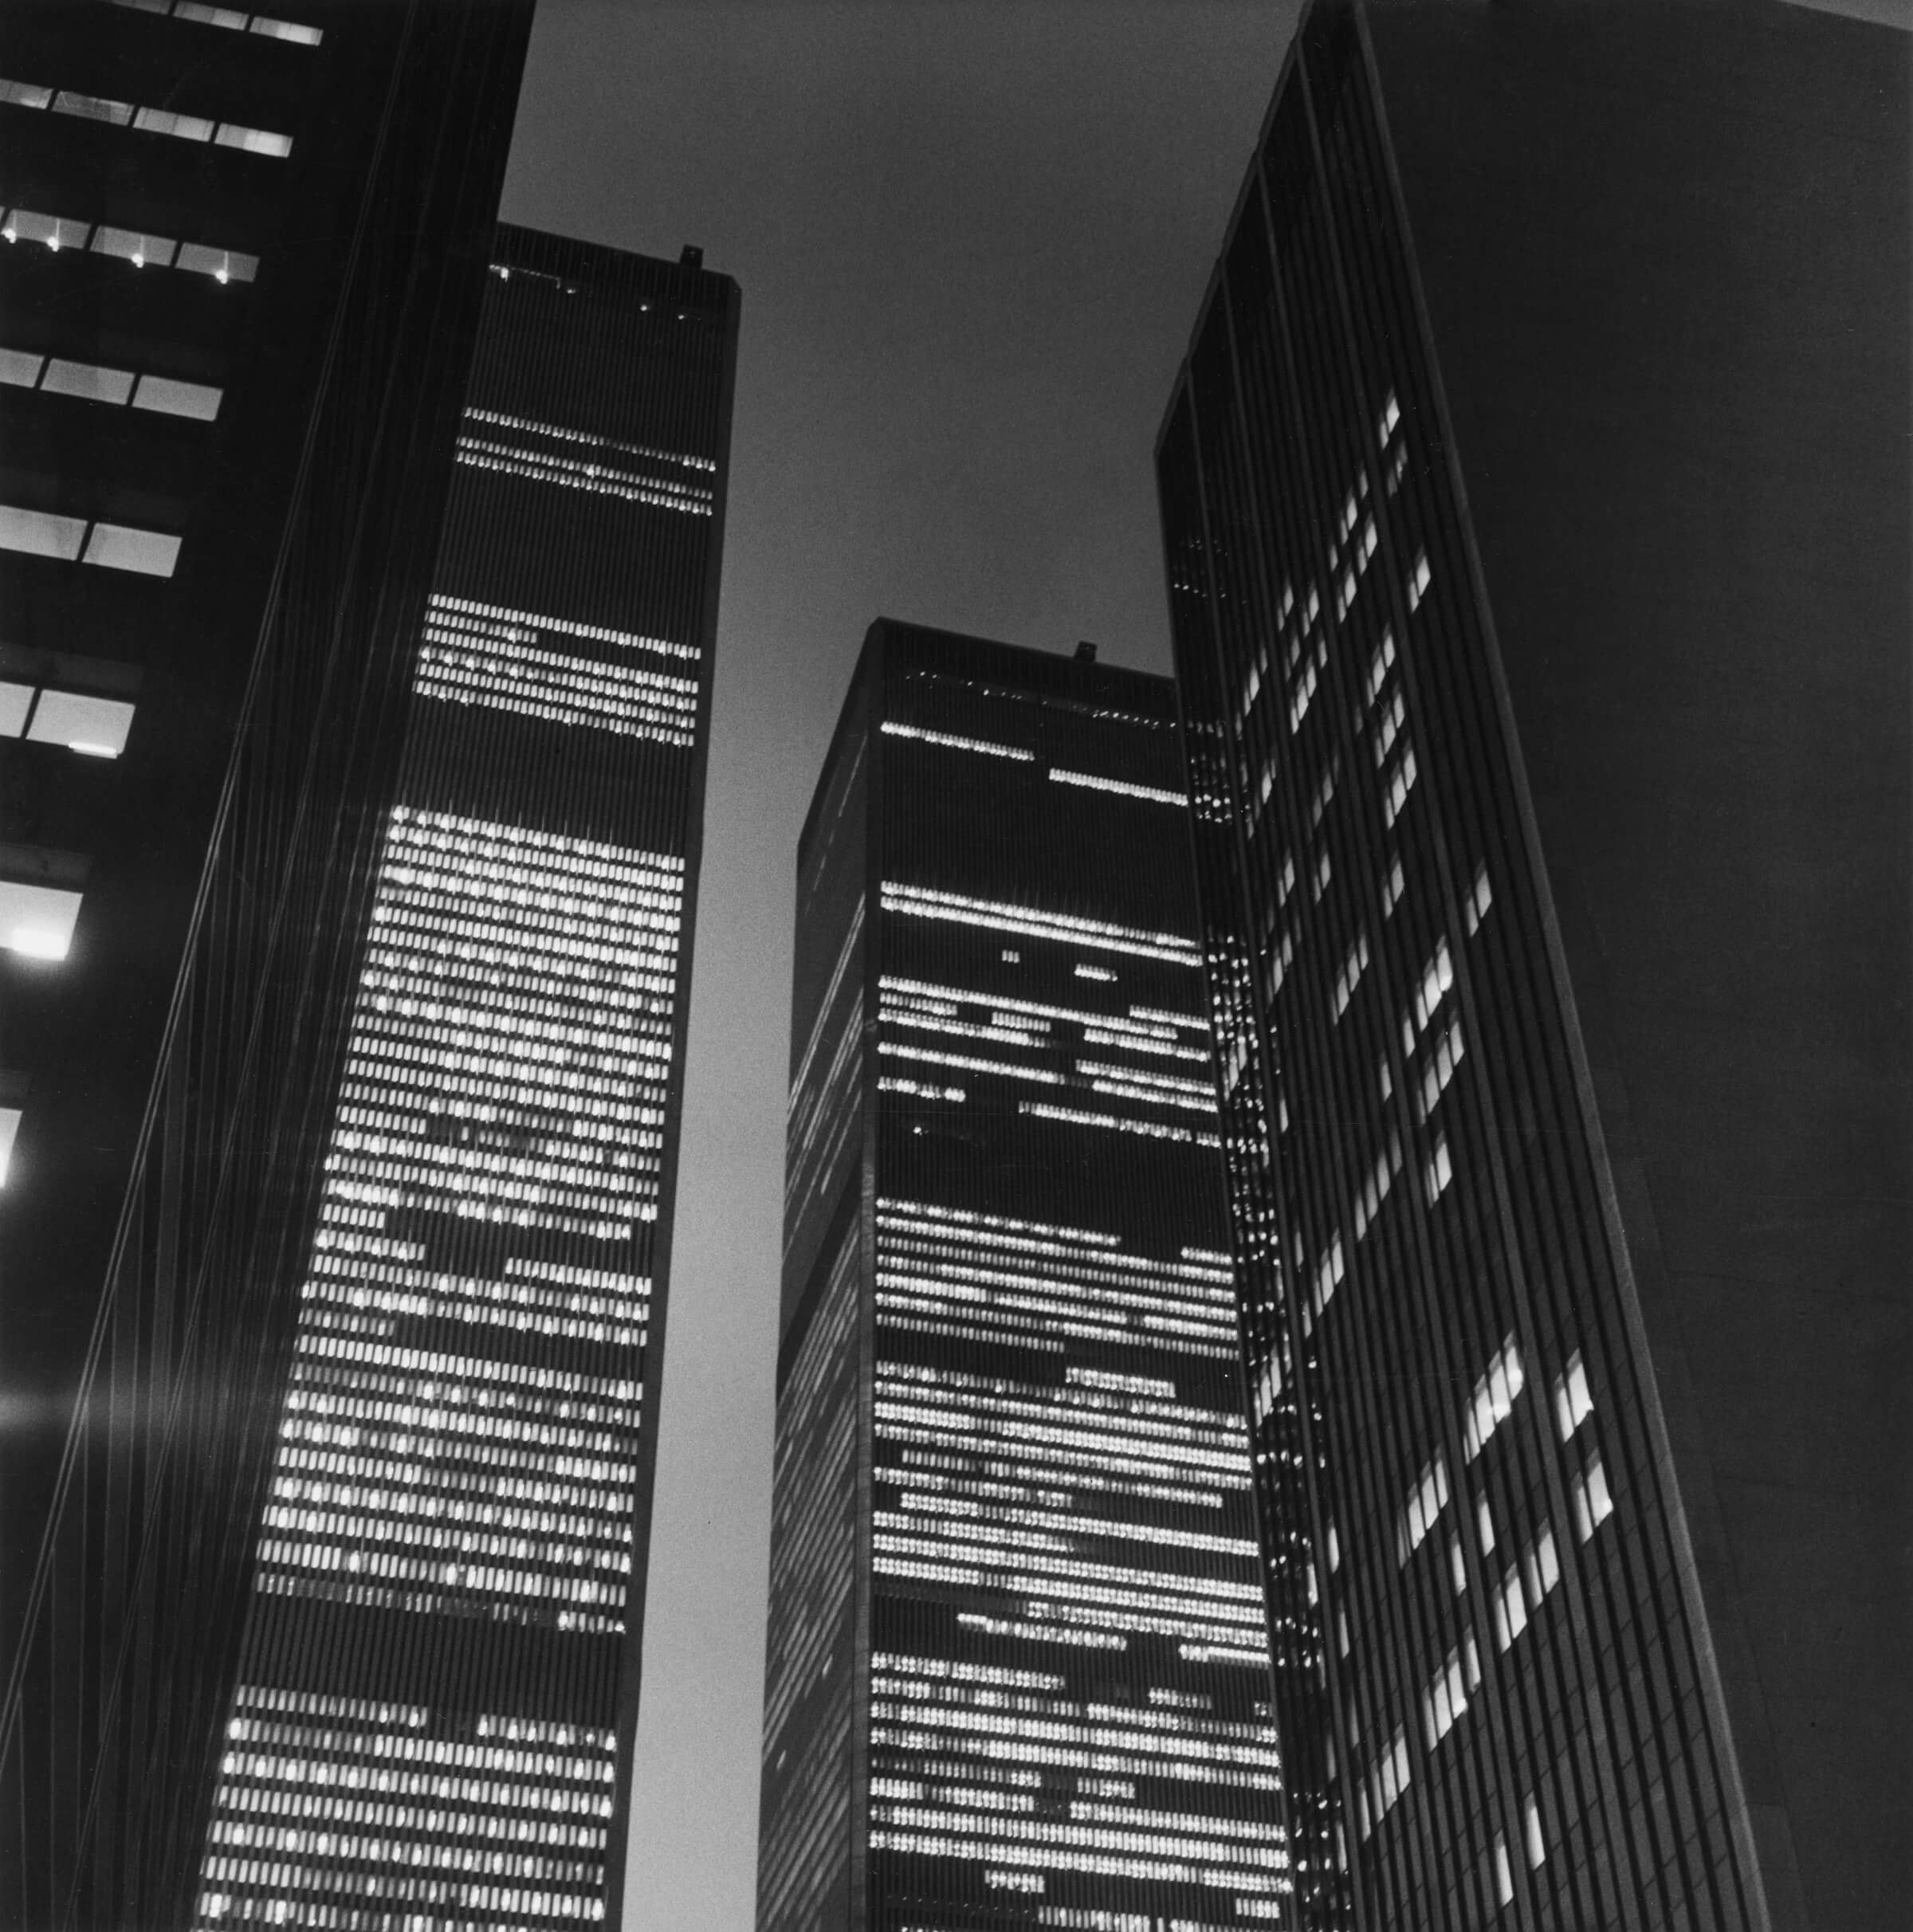 The world trade centers at night, one of two minoru yamasaki projects destroyed on live television